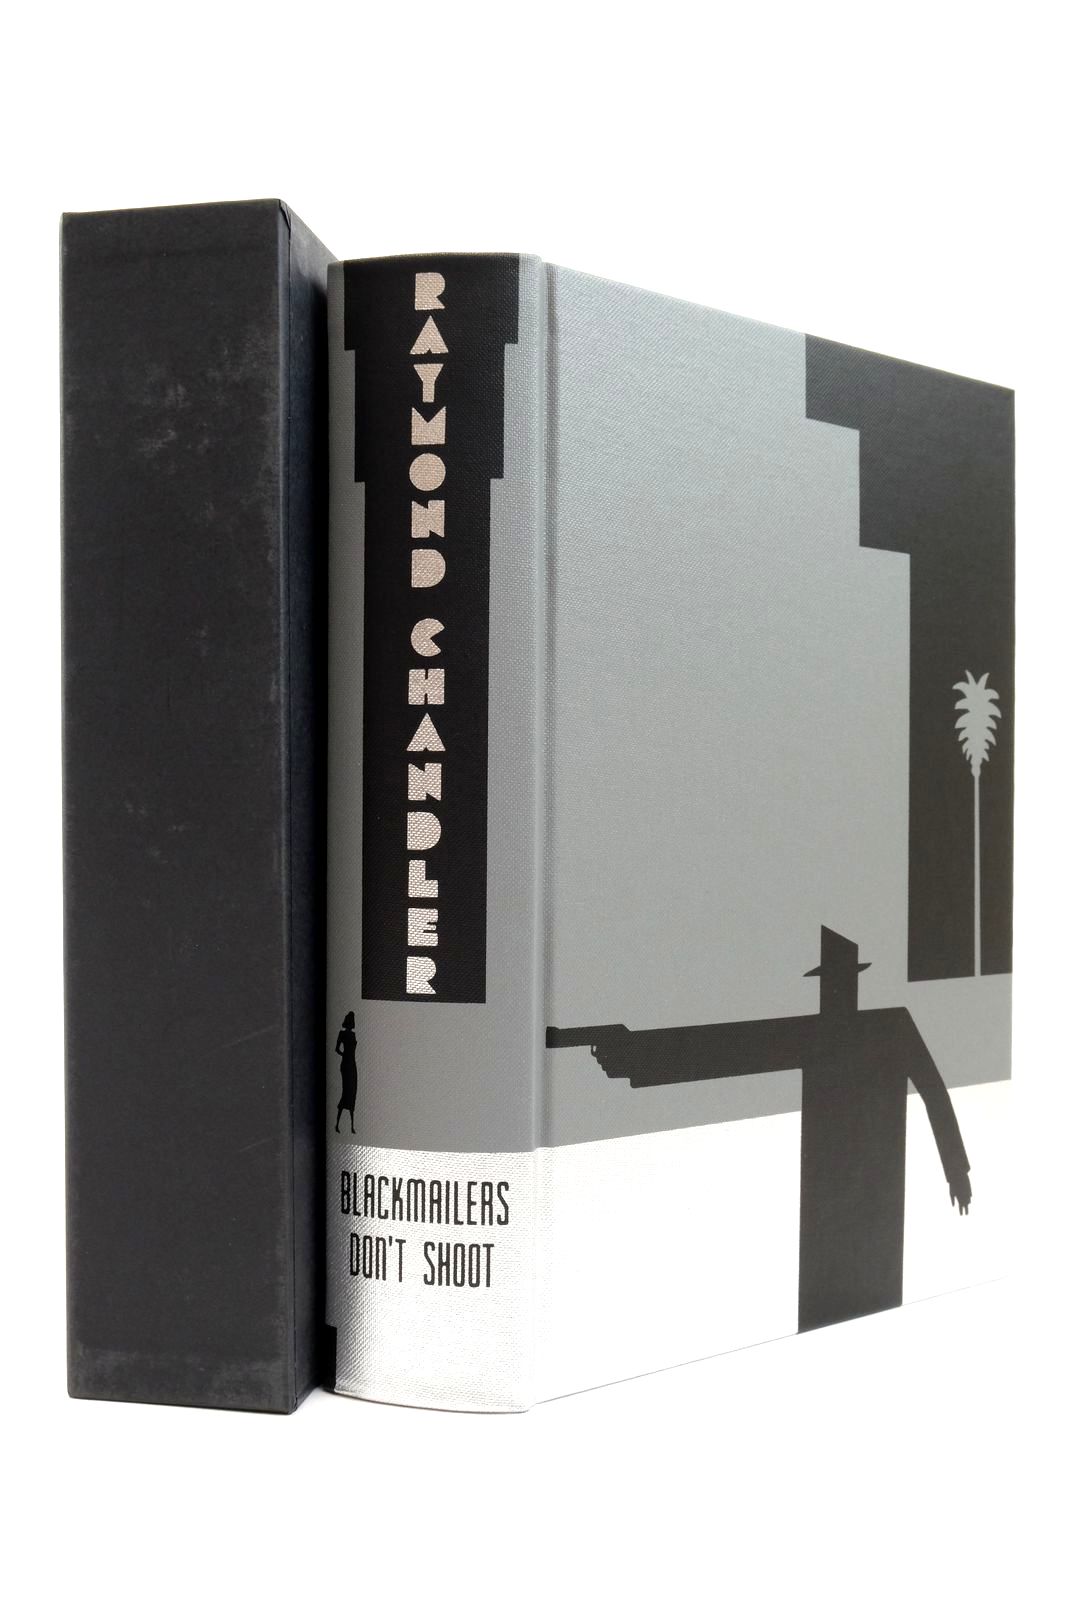 Photo of BLACKMAILERS DON'T SHOOT AND OTHER STORIES written by Chandler, Raymond illustrated by Grandfield, Geoff published by Folio Society (STOCK CODE: 2138811)  for sale by Stella & Rose's Books